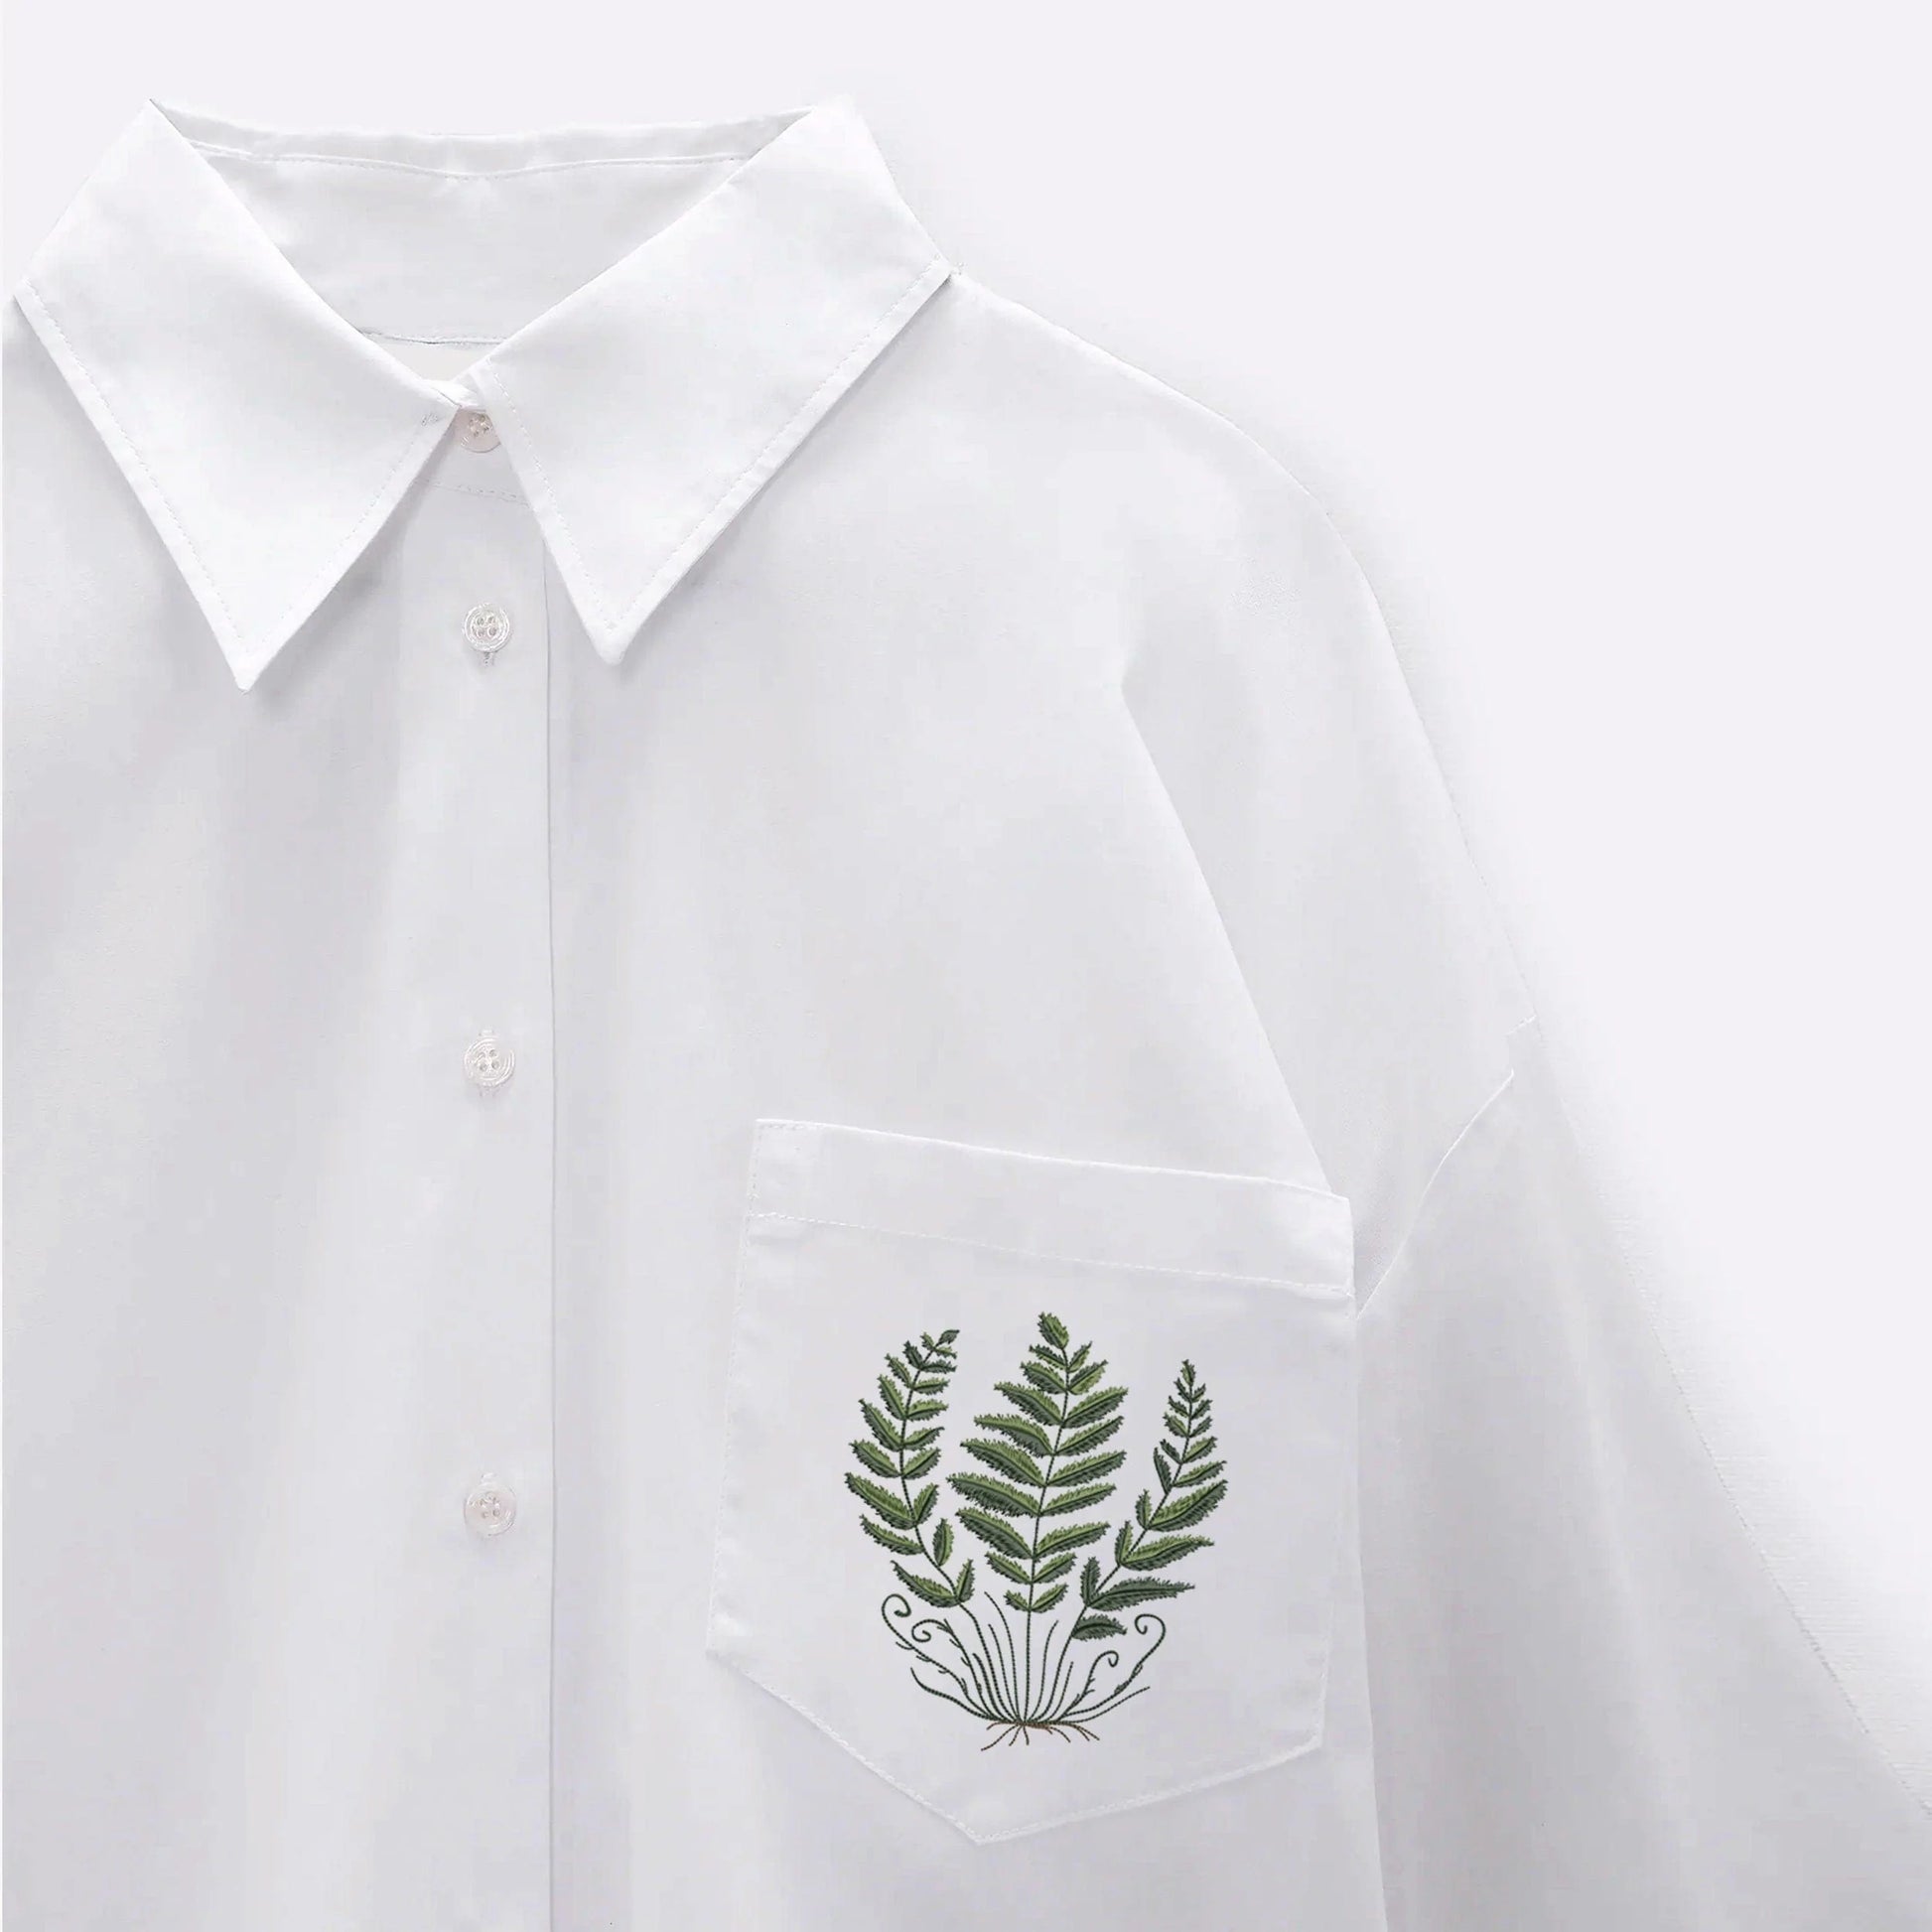 Forest Fern Machine Embroidery Design on white blouse pocket